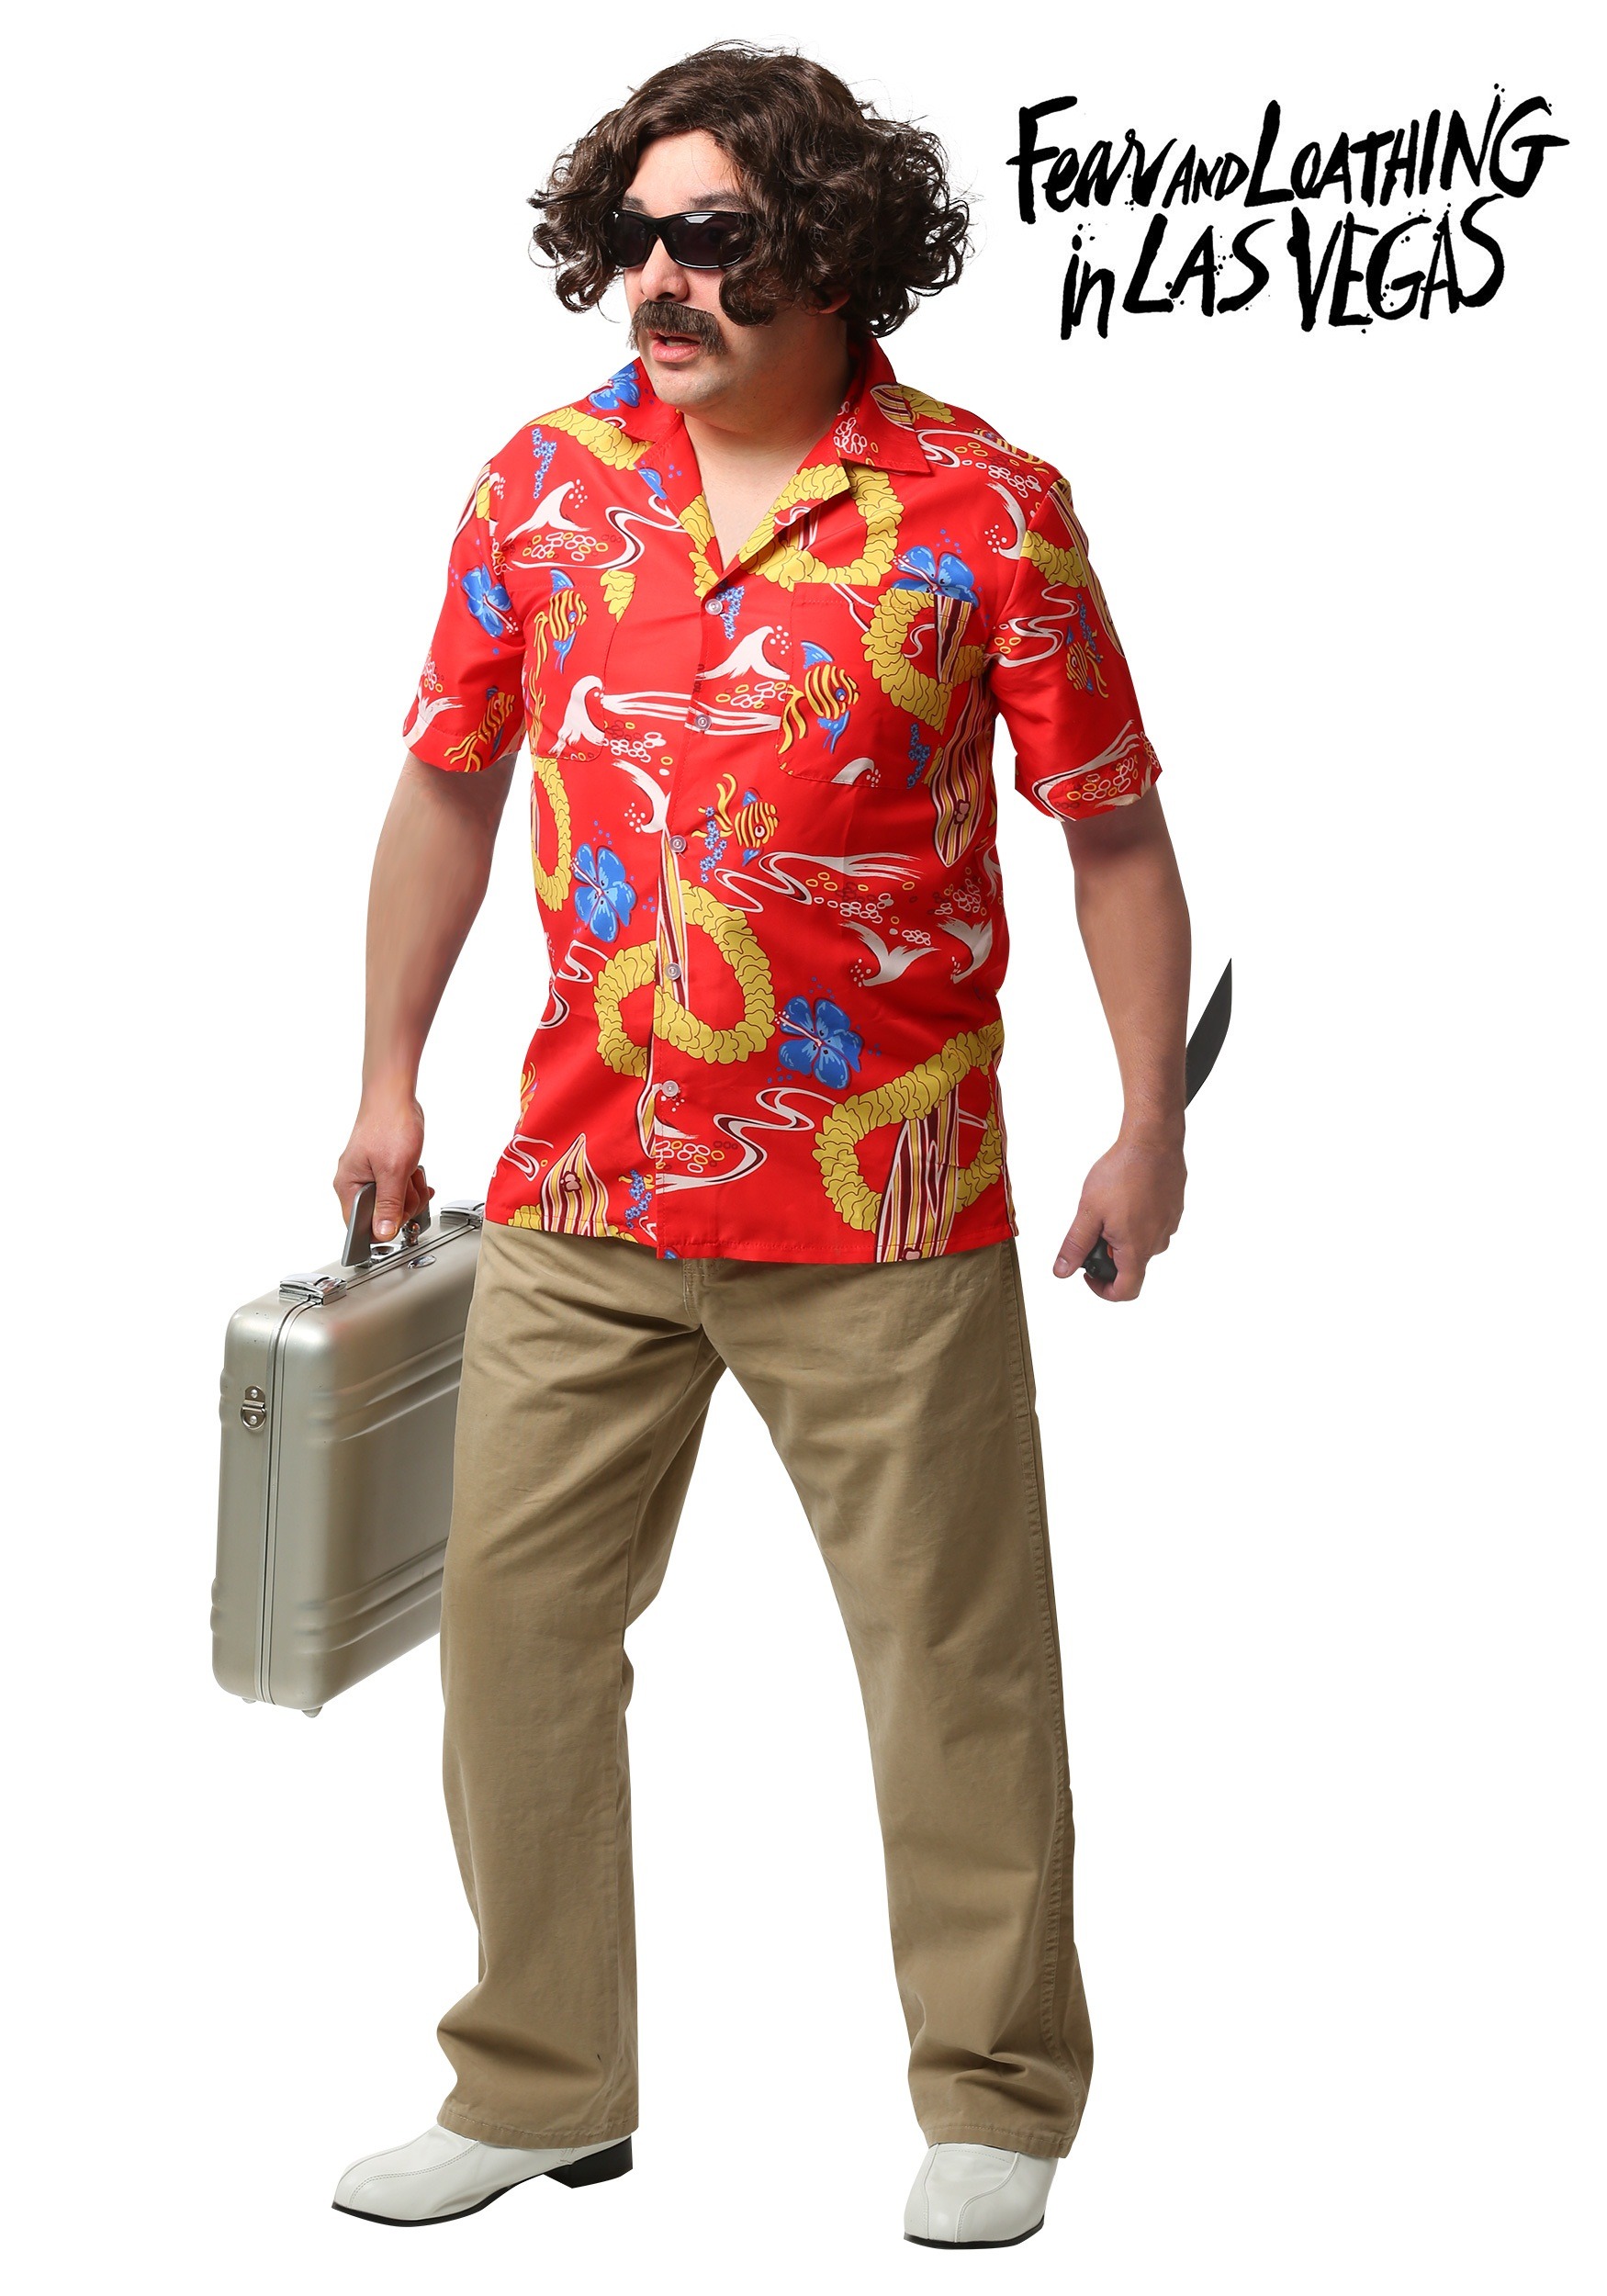 Fear And Loathing Costume - HD Wallpaper 